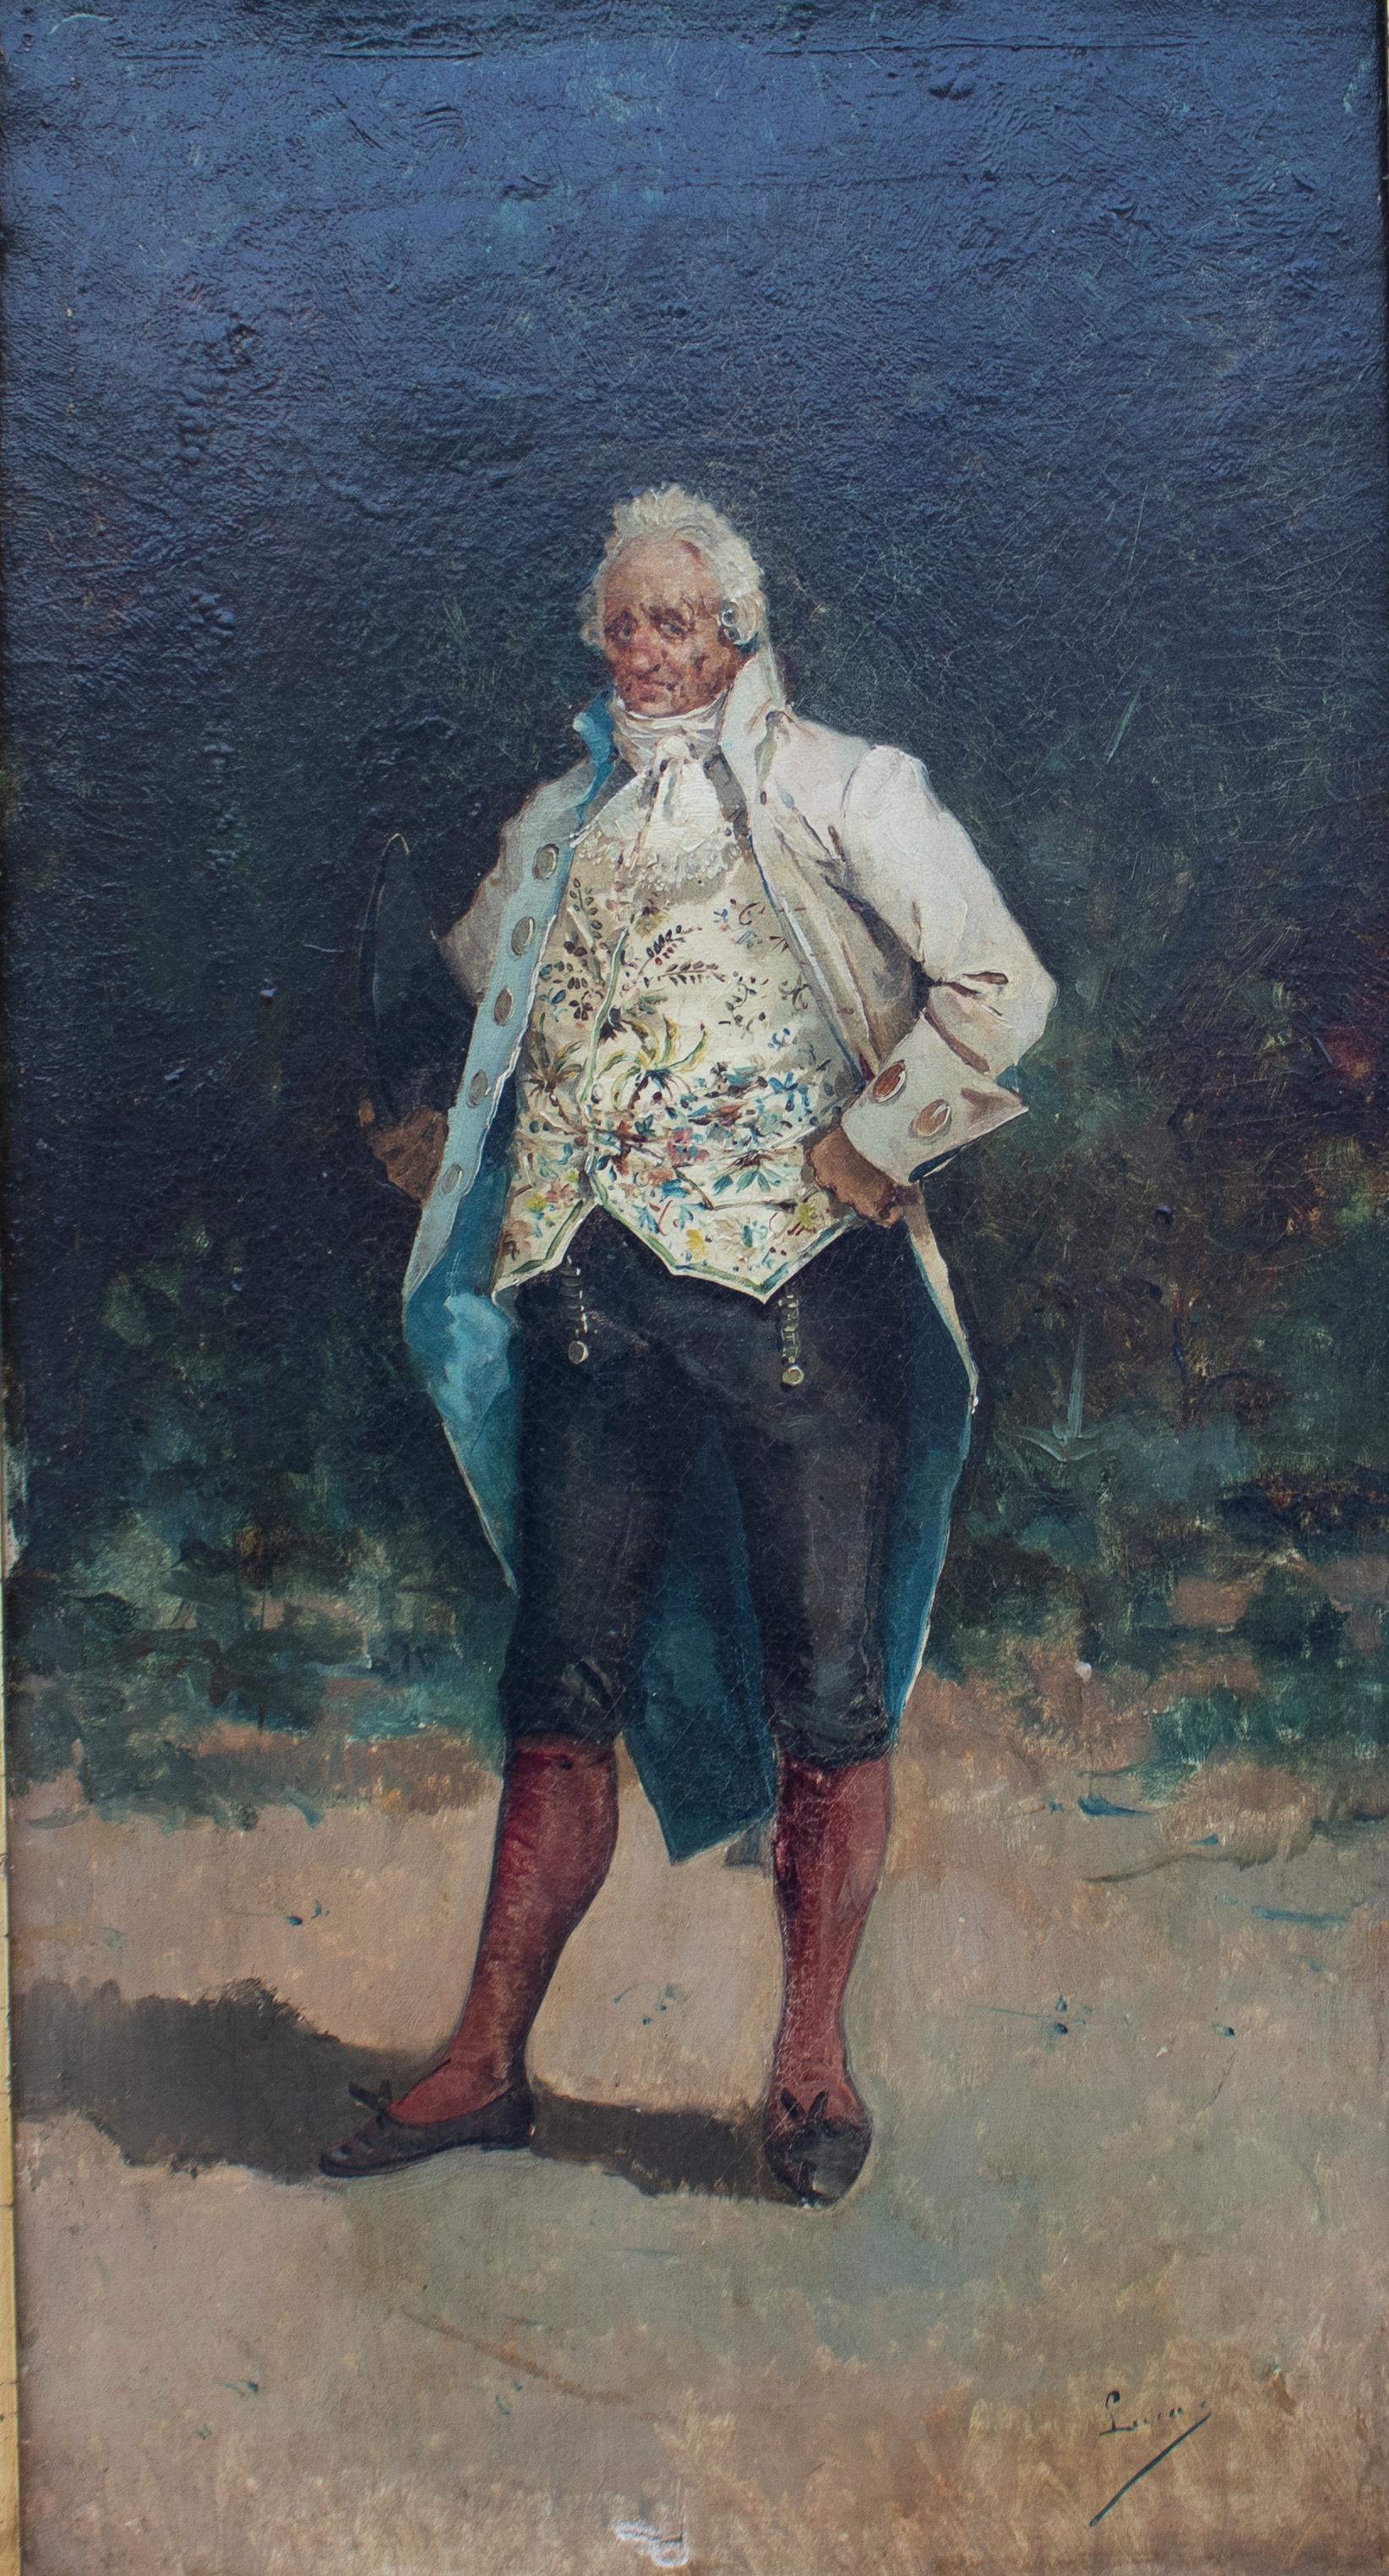 19th century oil on canvas portrait by Eugenio Lucas.

Dimensions with frame: 67 x 47.5 x 7.5cm.